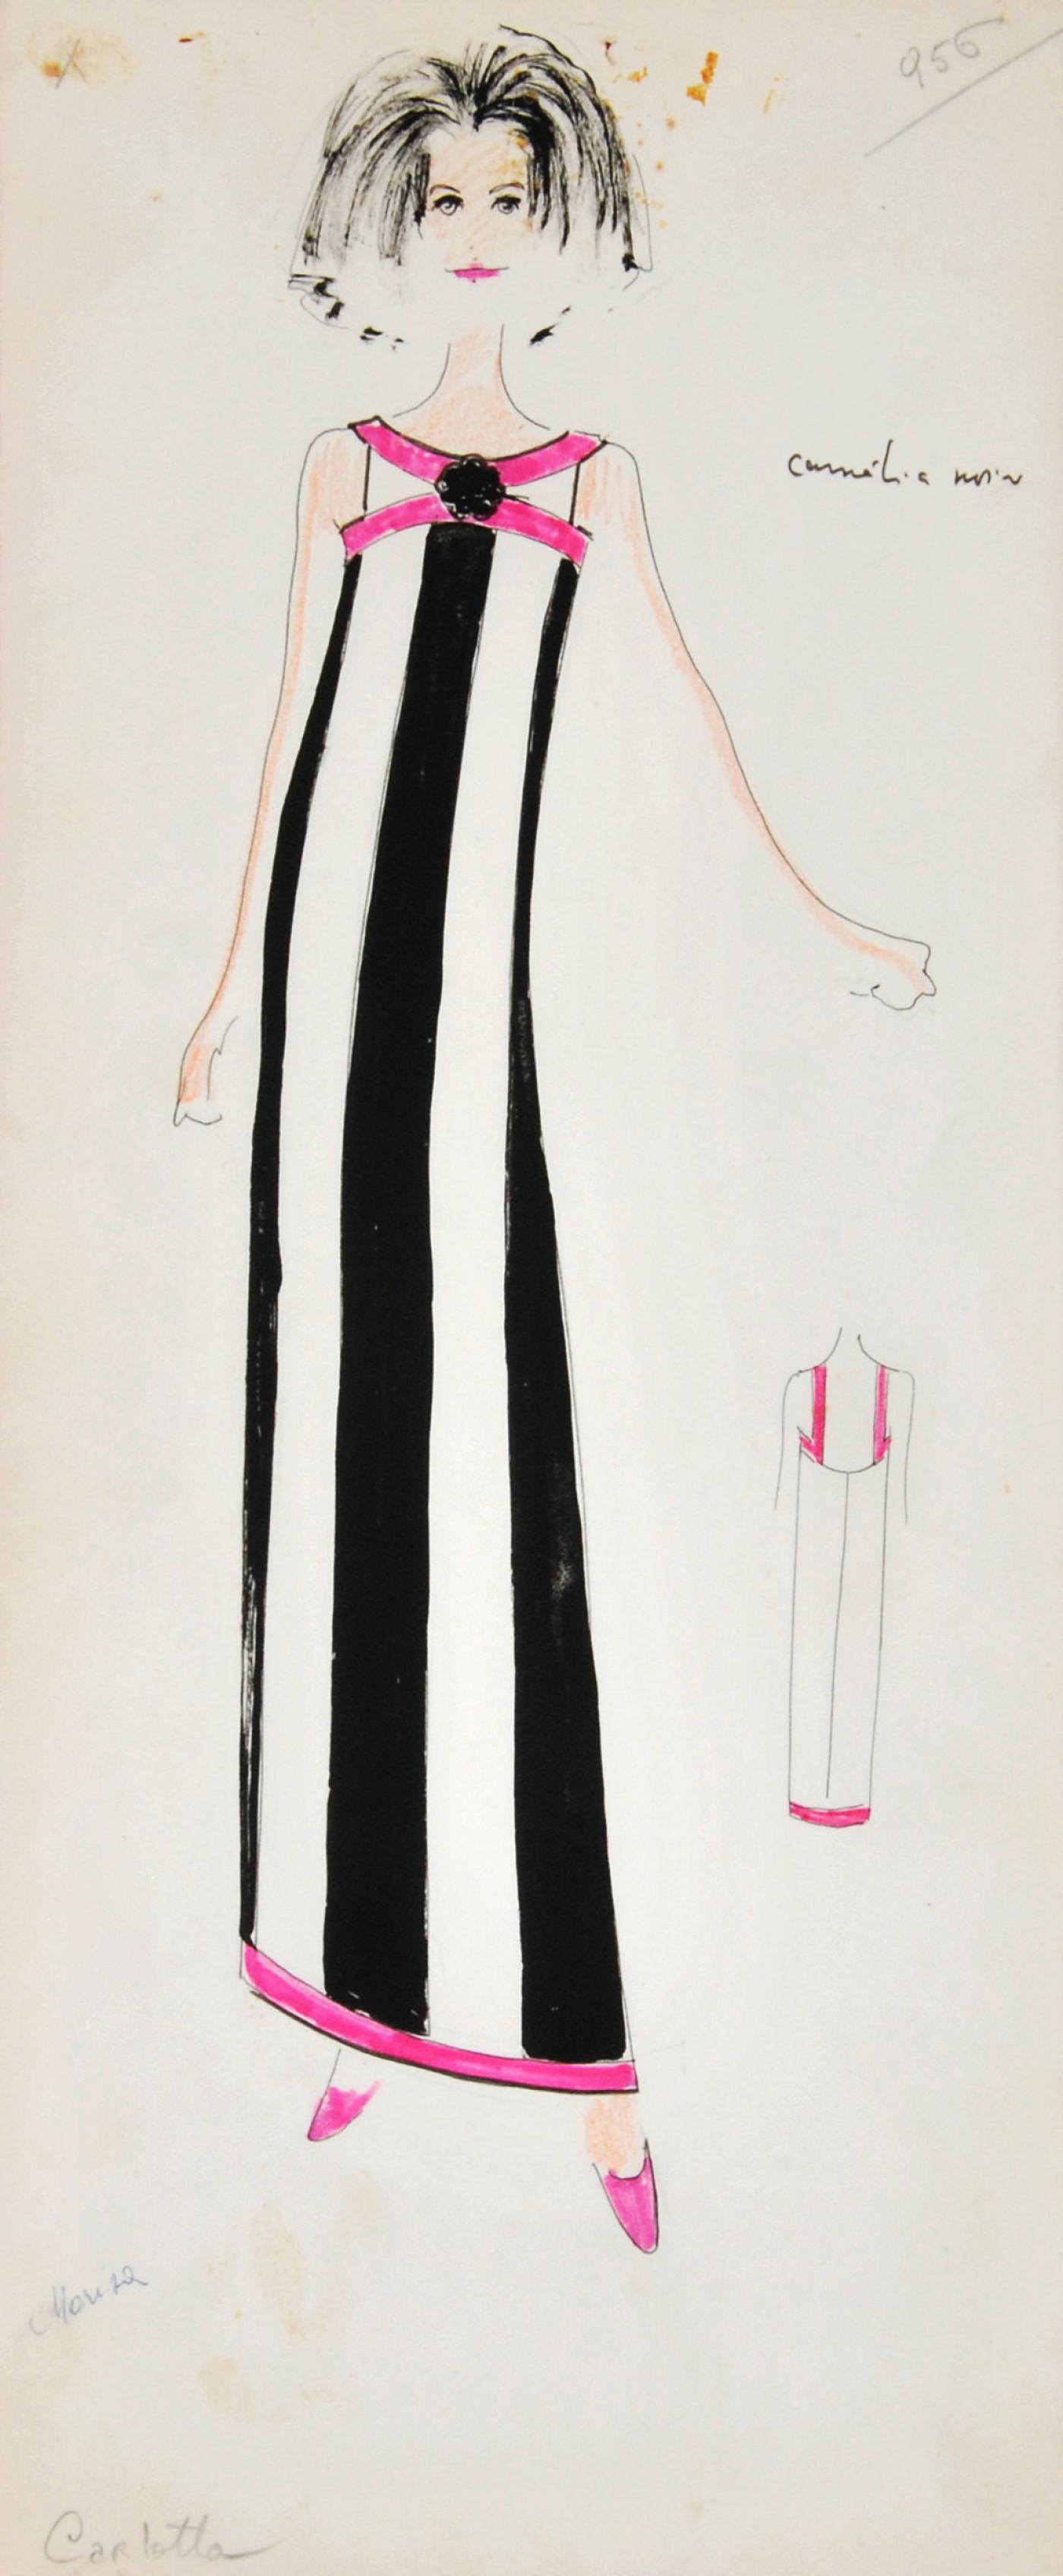 Next Chapter of Karl Lagerfeld Auctions Highlights Couturier's Sketches